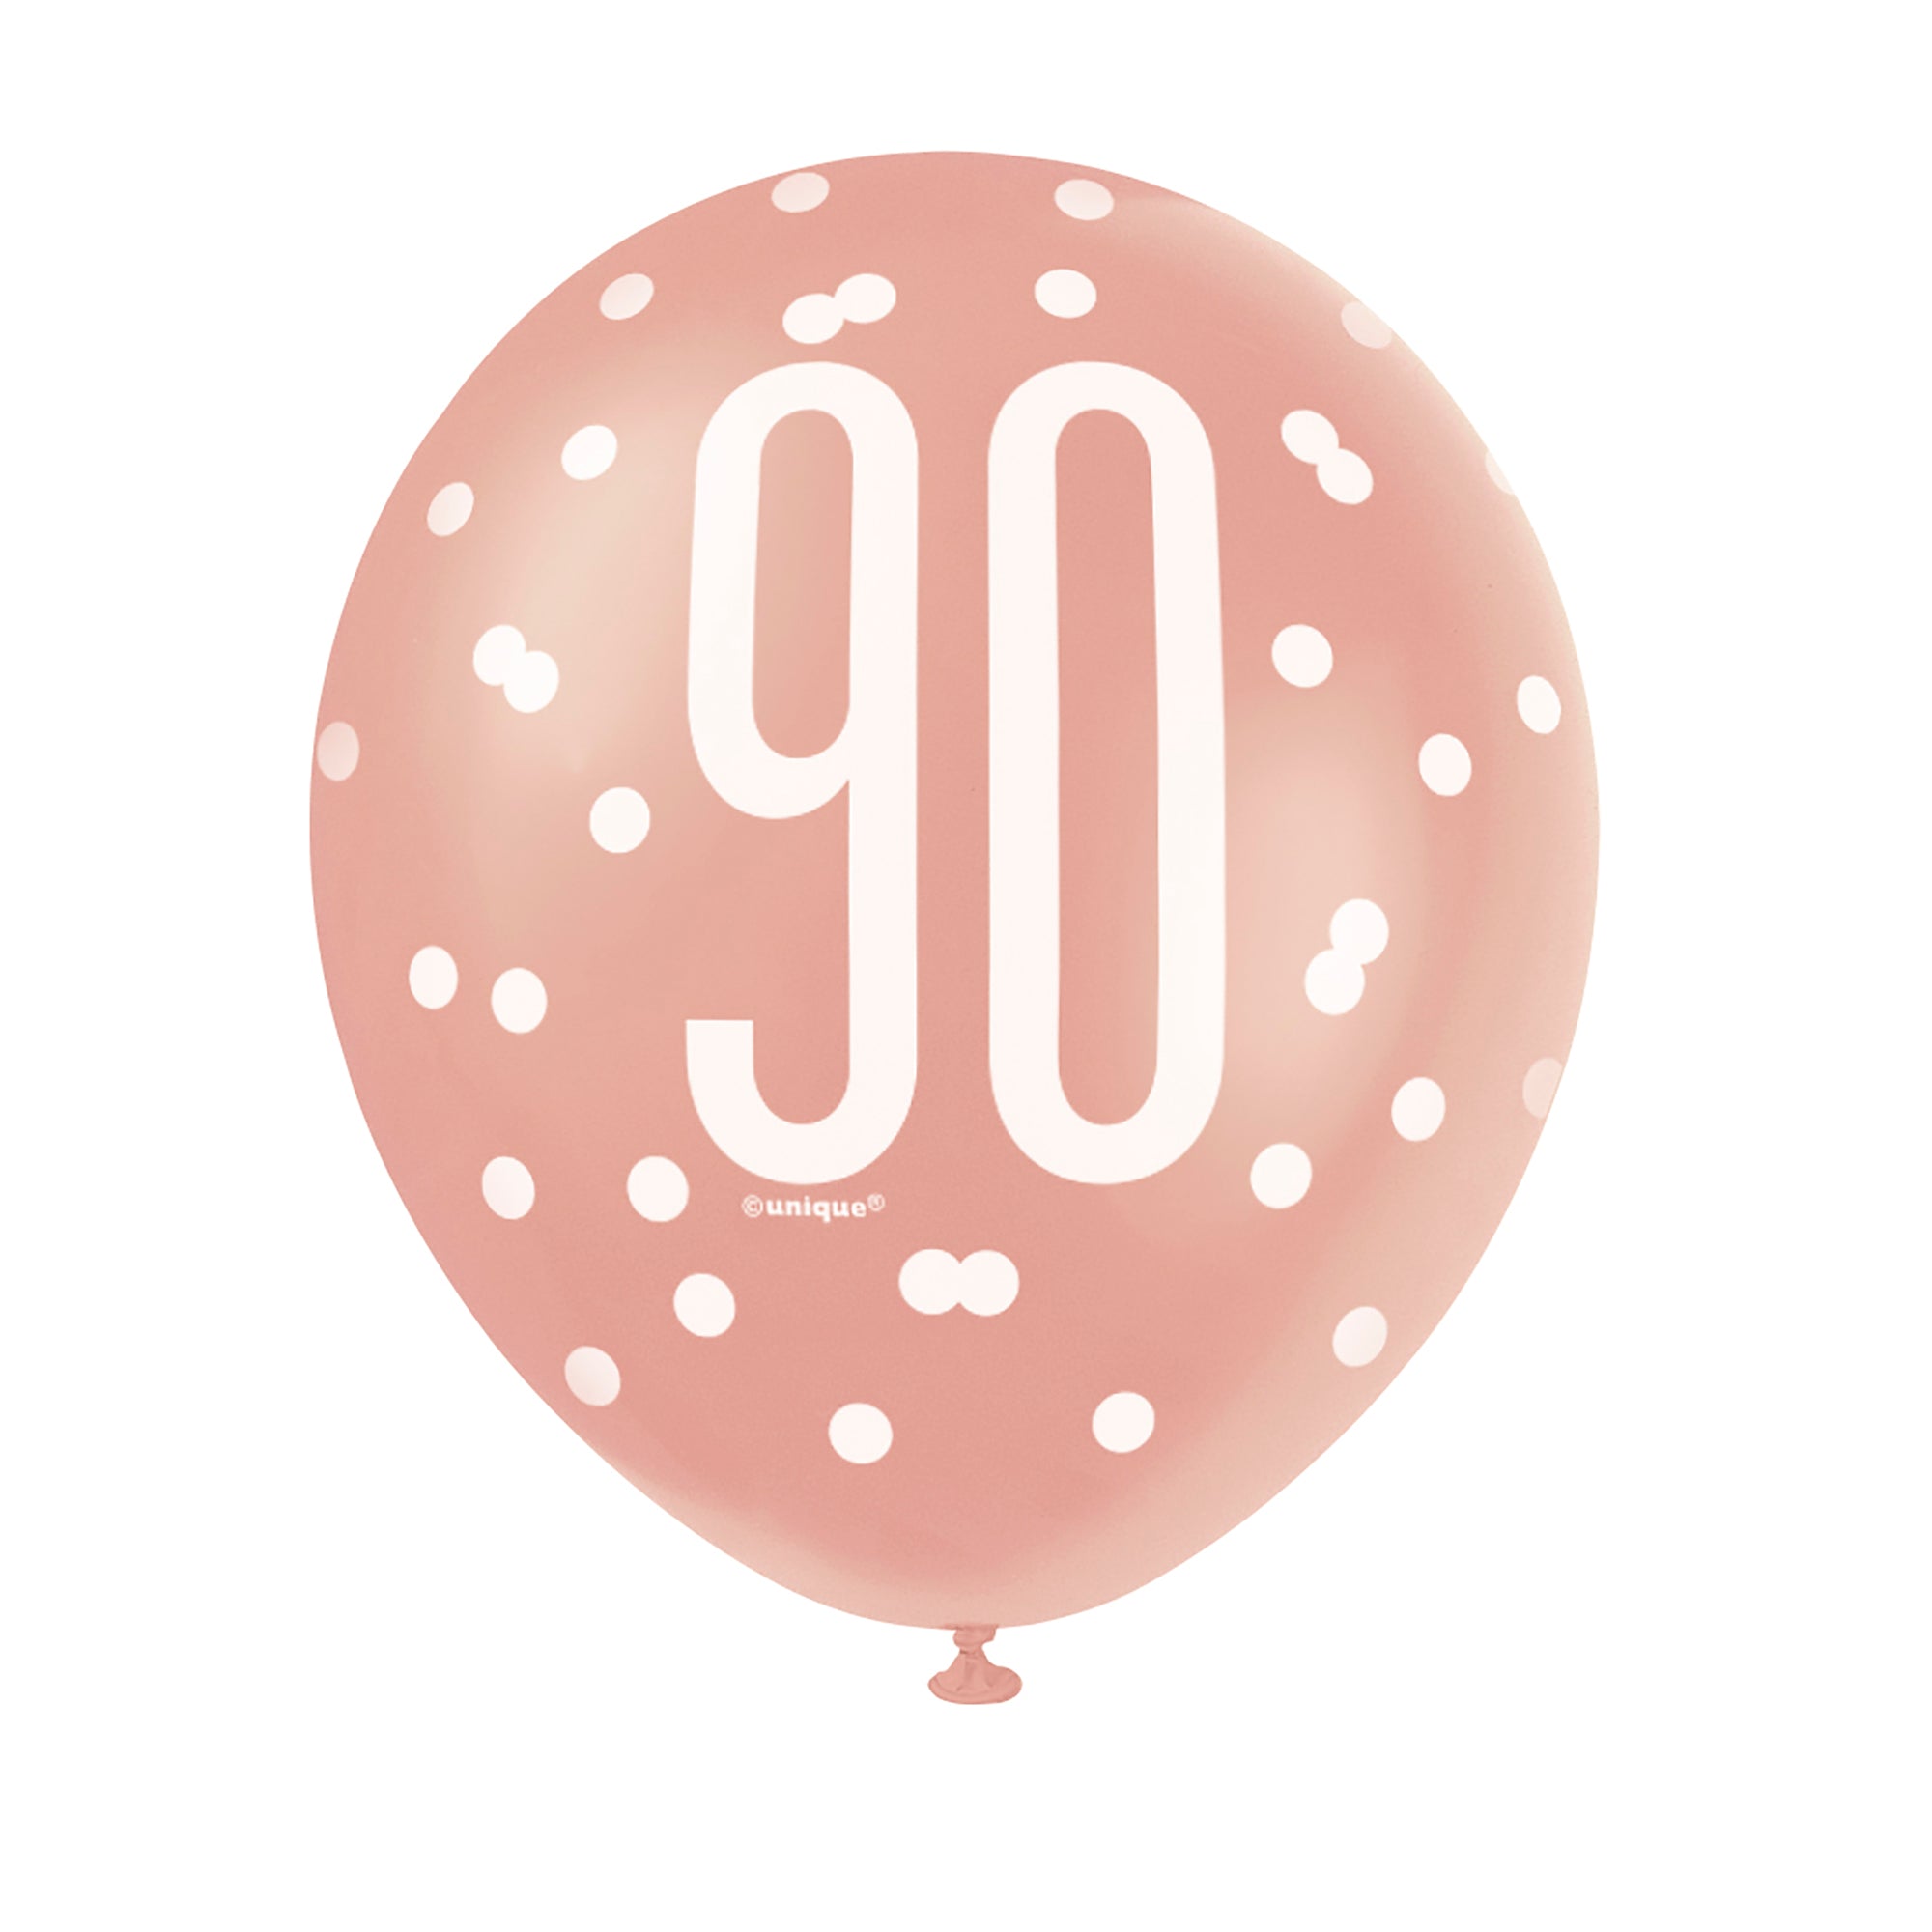 Age 90 6 Printed Latex Balloons 12in Pink and White 